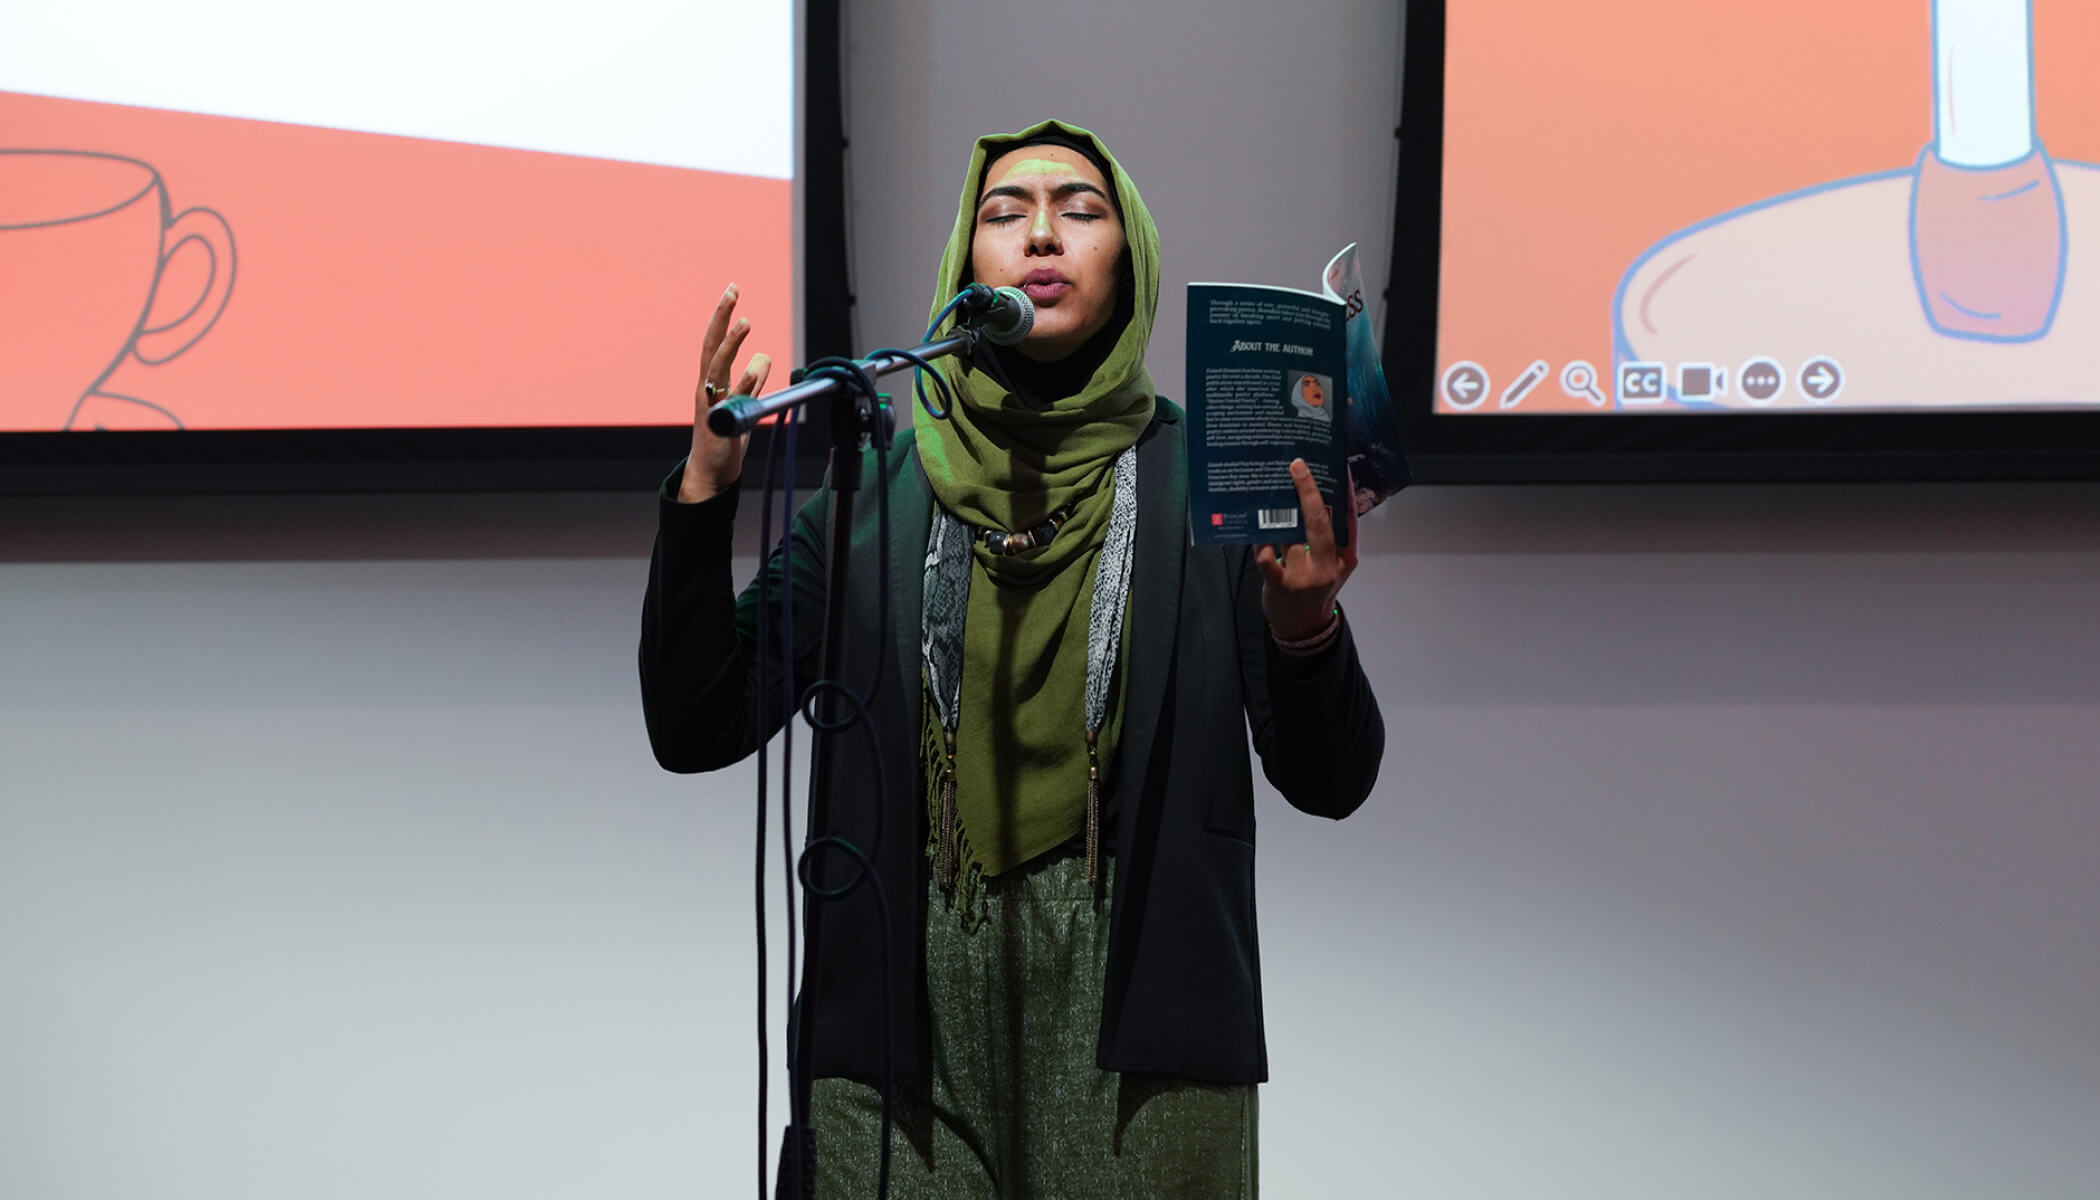 A woman in a green hijab reads from a book before a mic. Her hand is raised in expression.